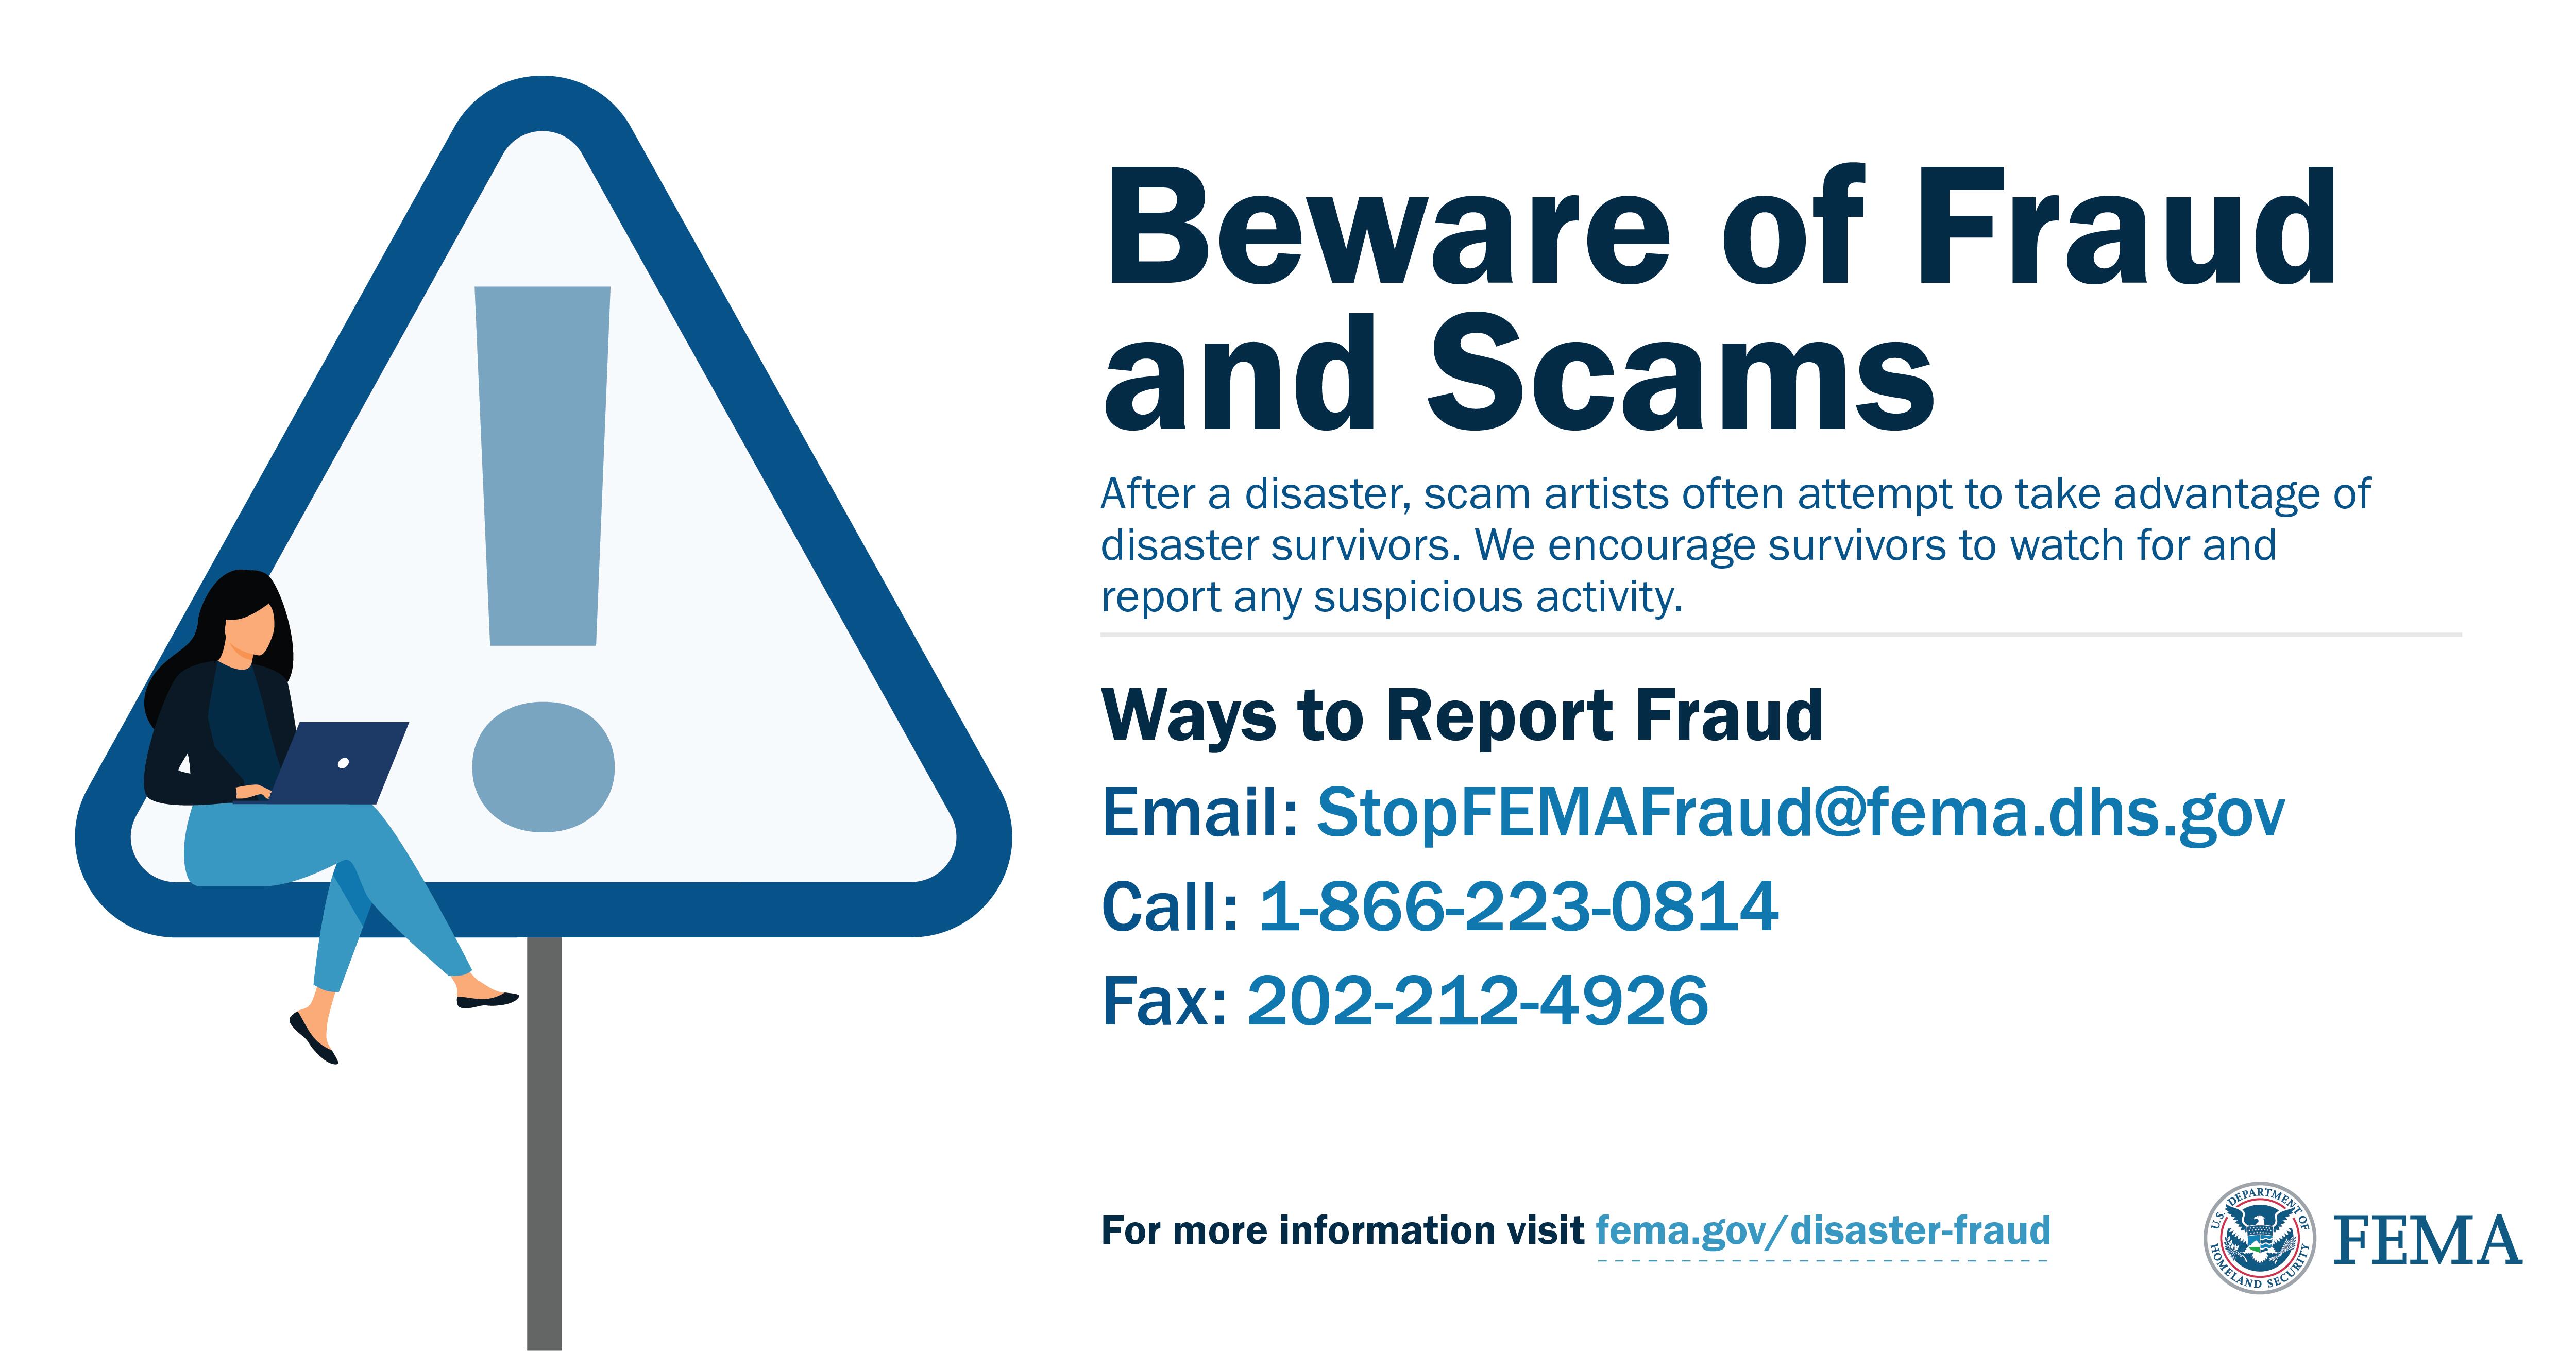 Beware of Scams and Fraud - 1-866-223-0814